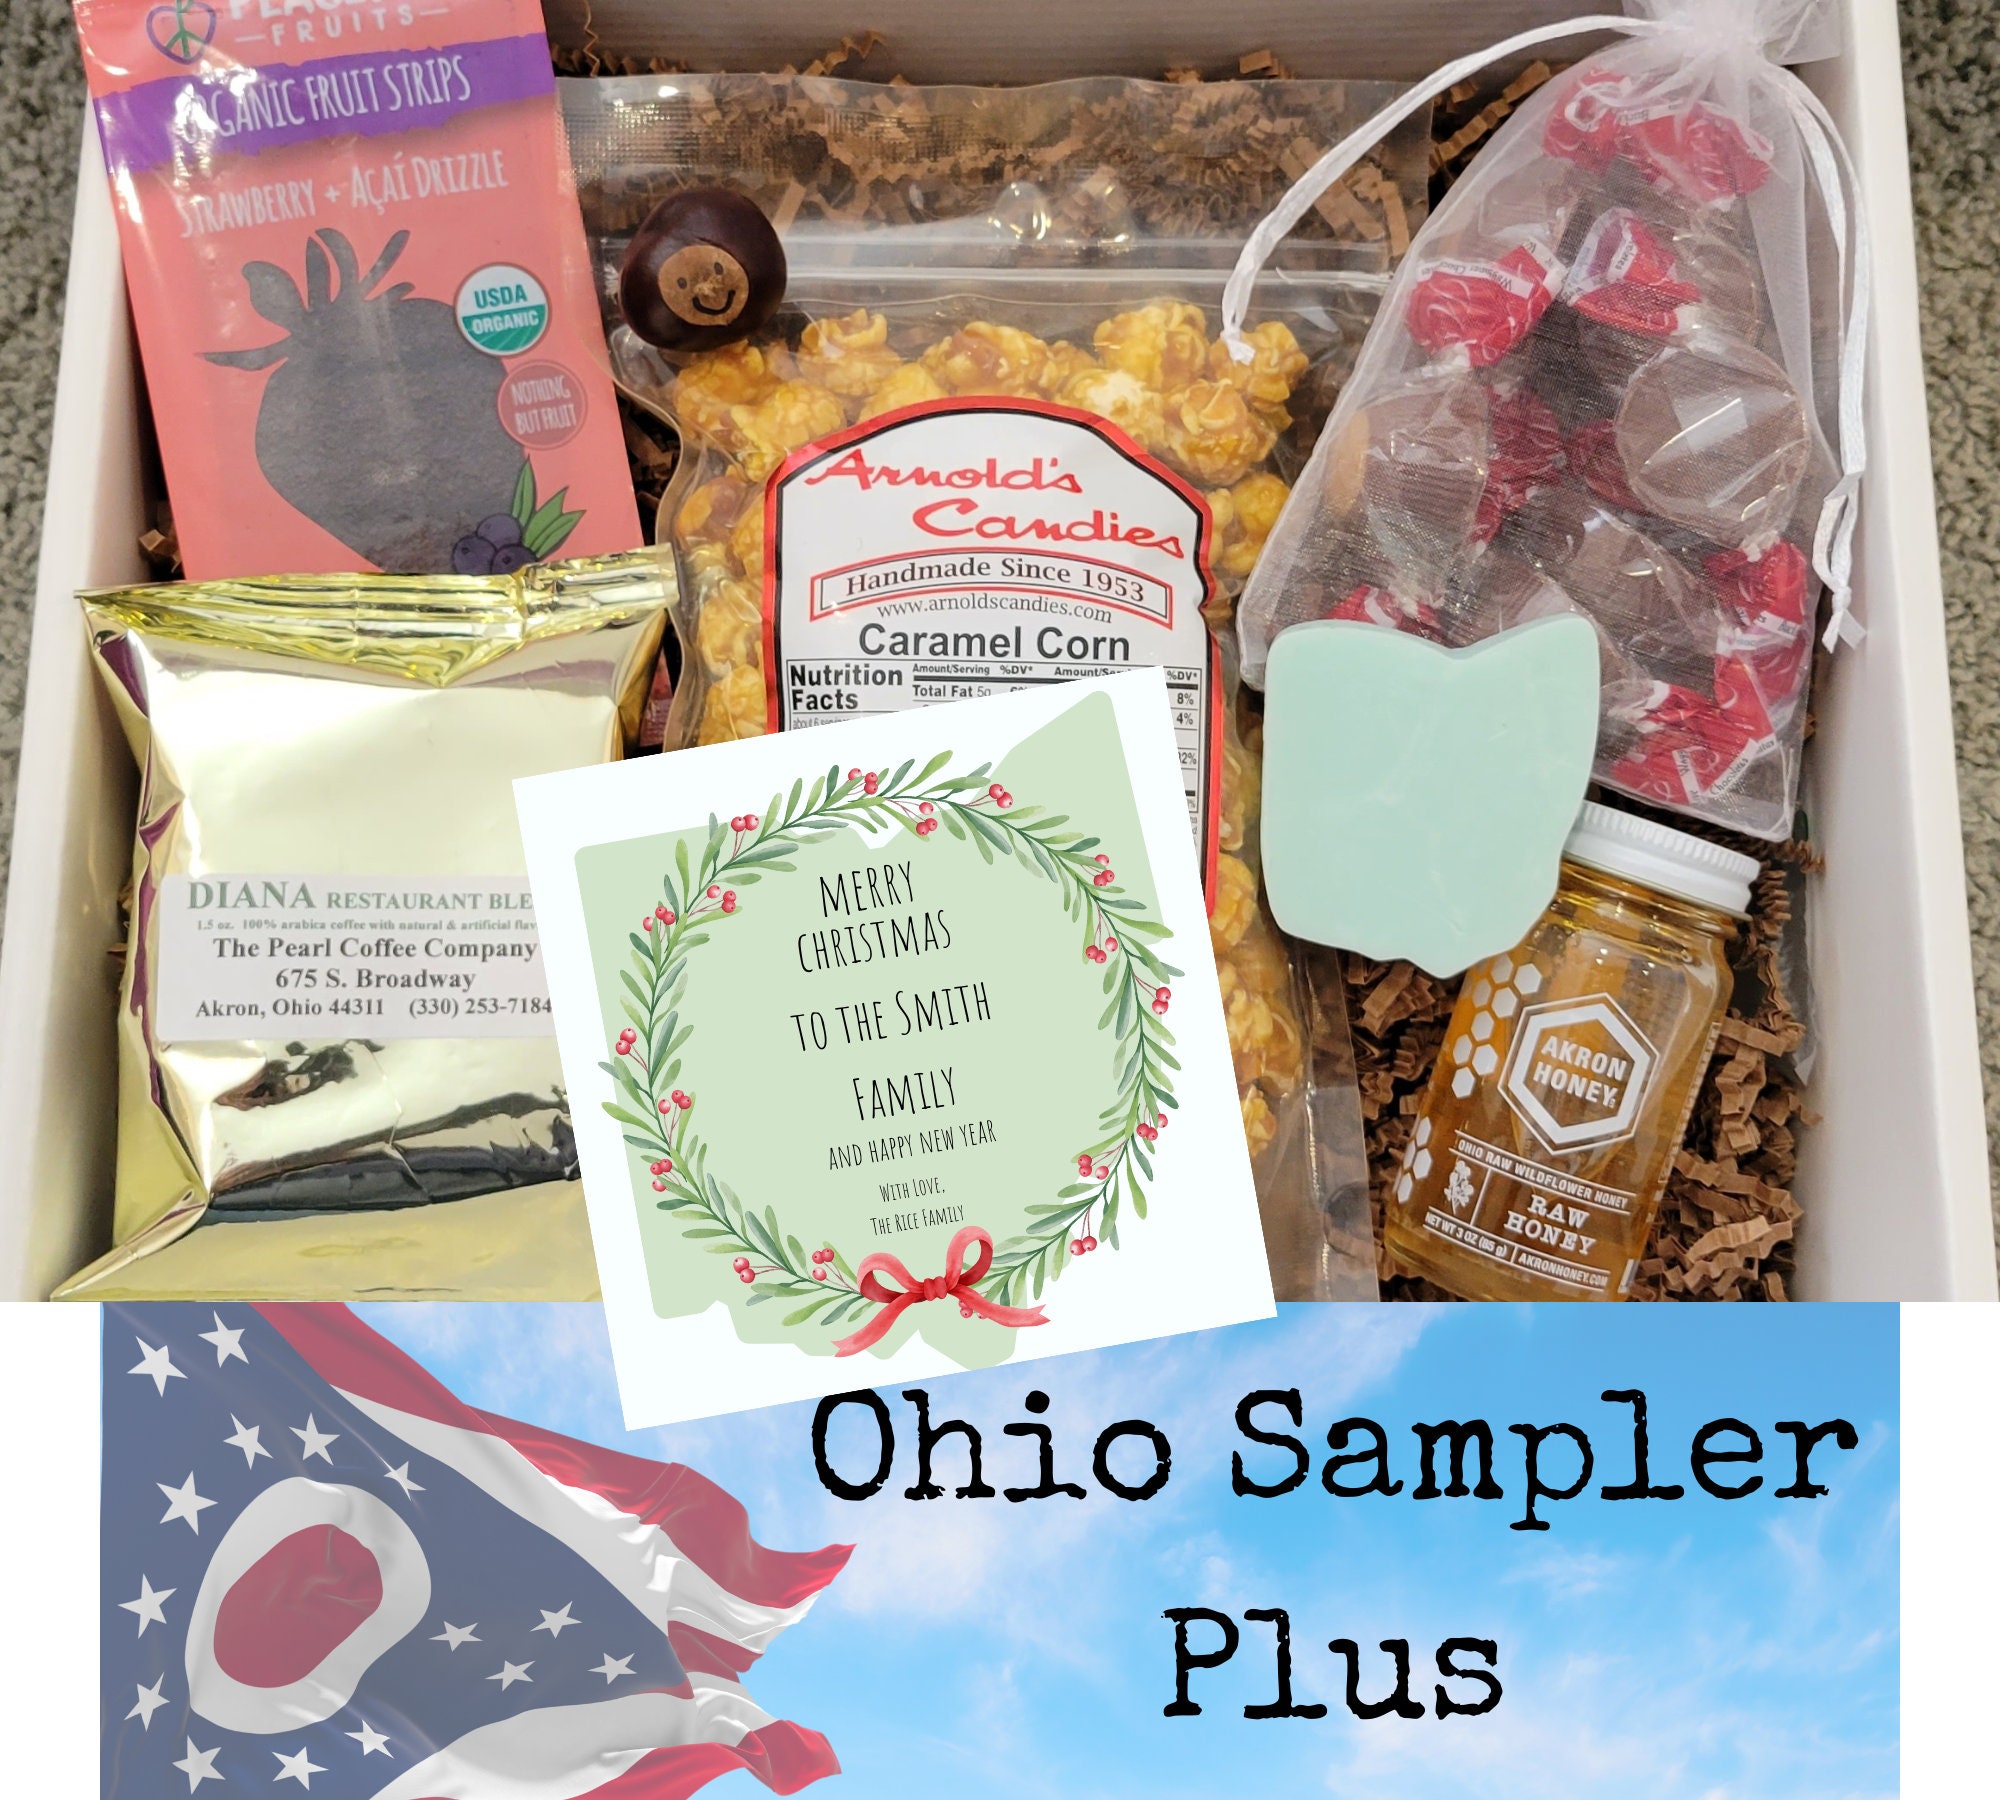 OSU Striped 8 Cookies Gift Box - Assorted Flavors